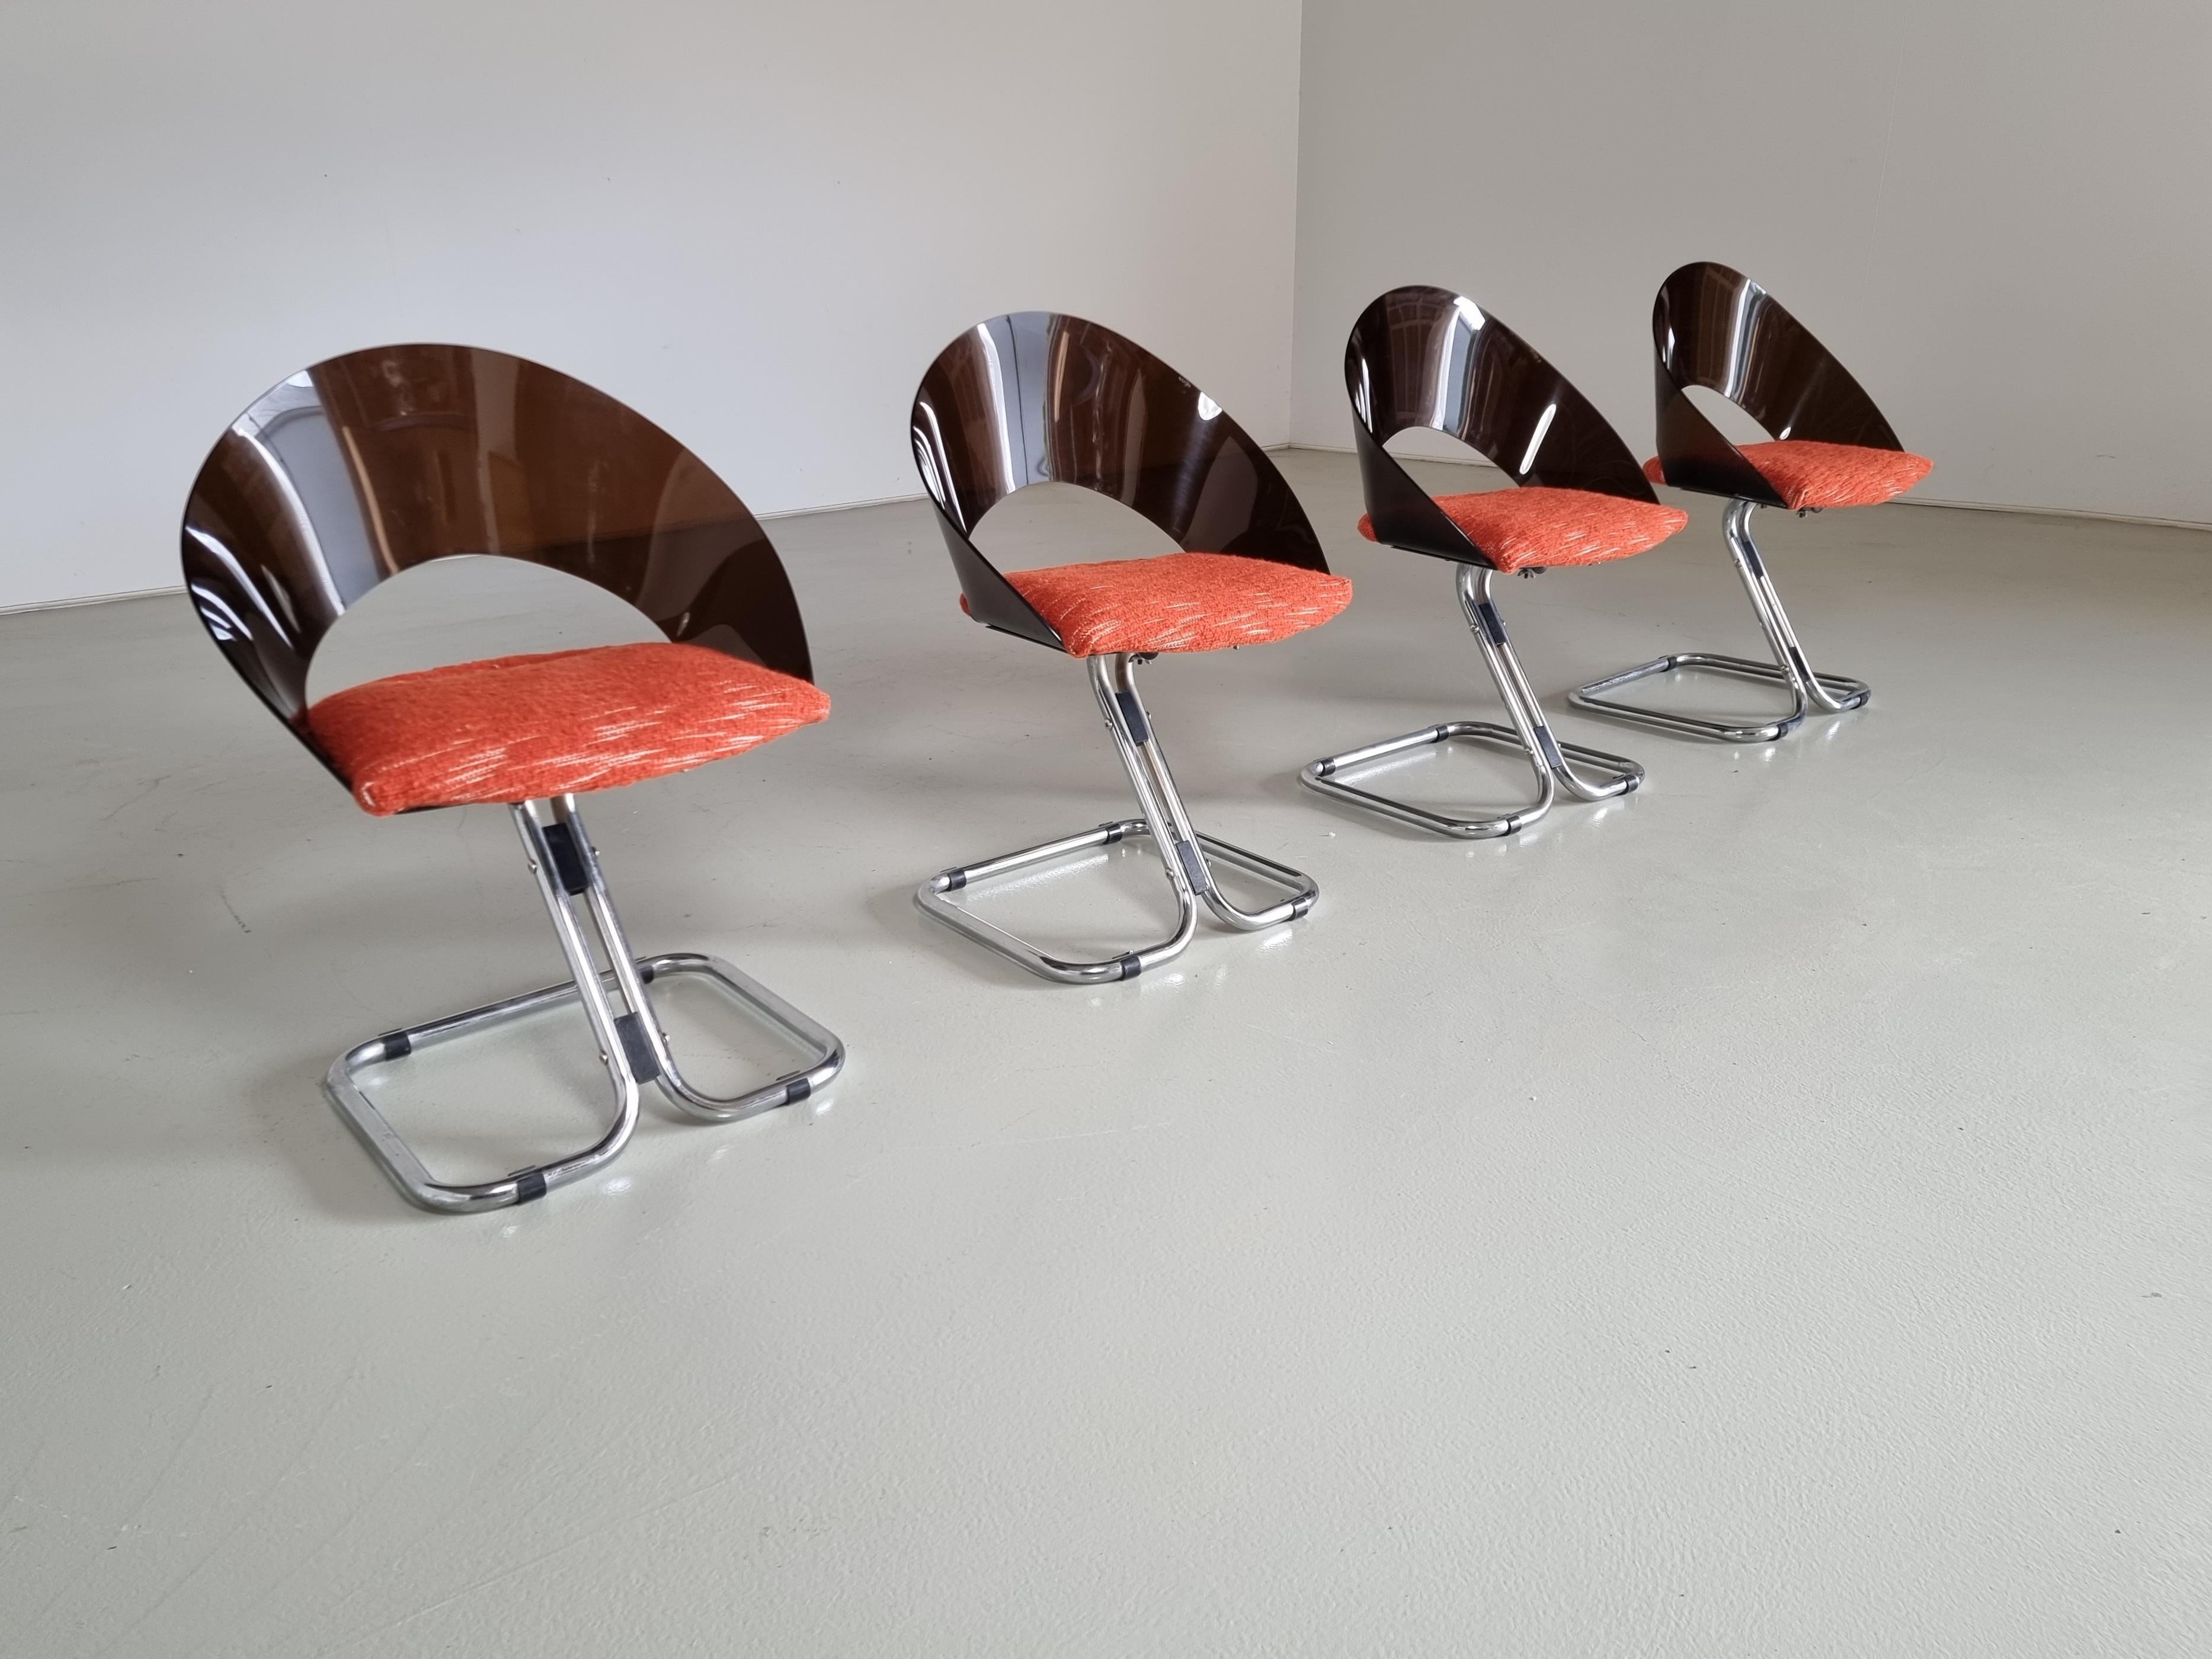 Space Age Set of 4 Italian Spage Age Plexiglass Dining Chairs, 1970s For Sale